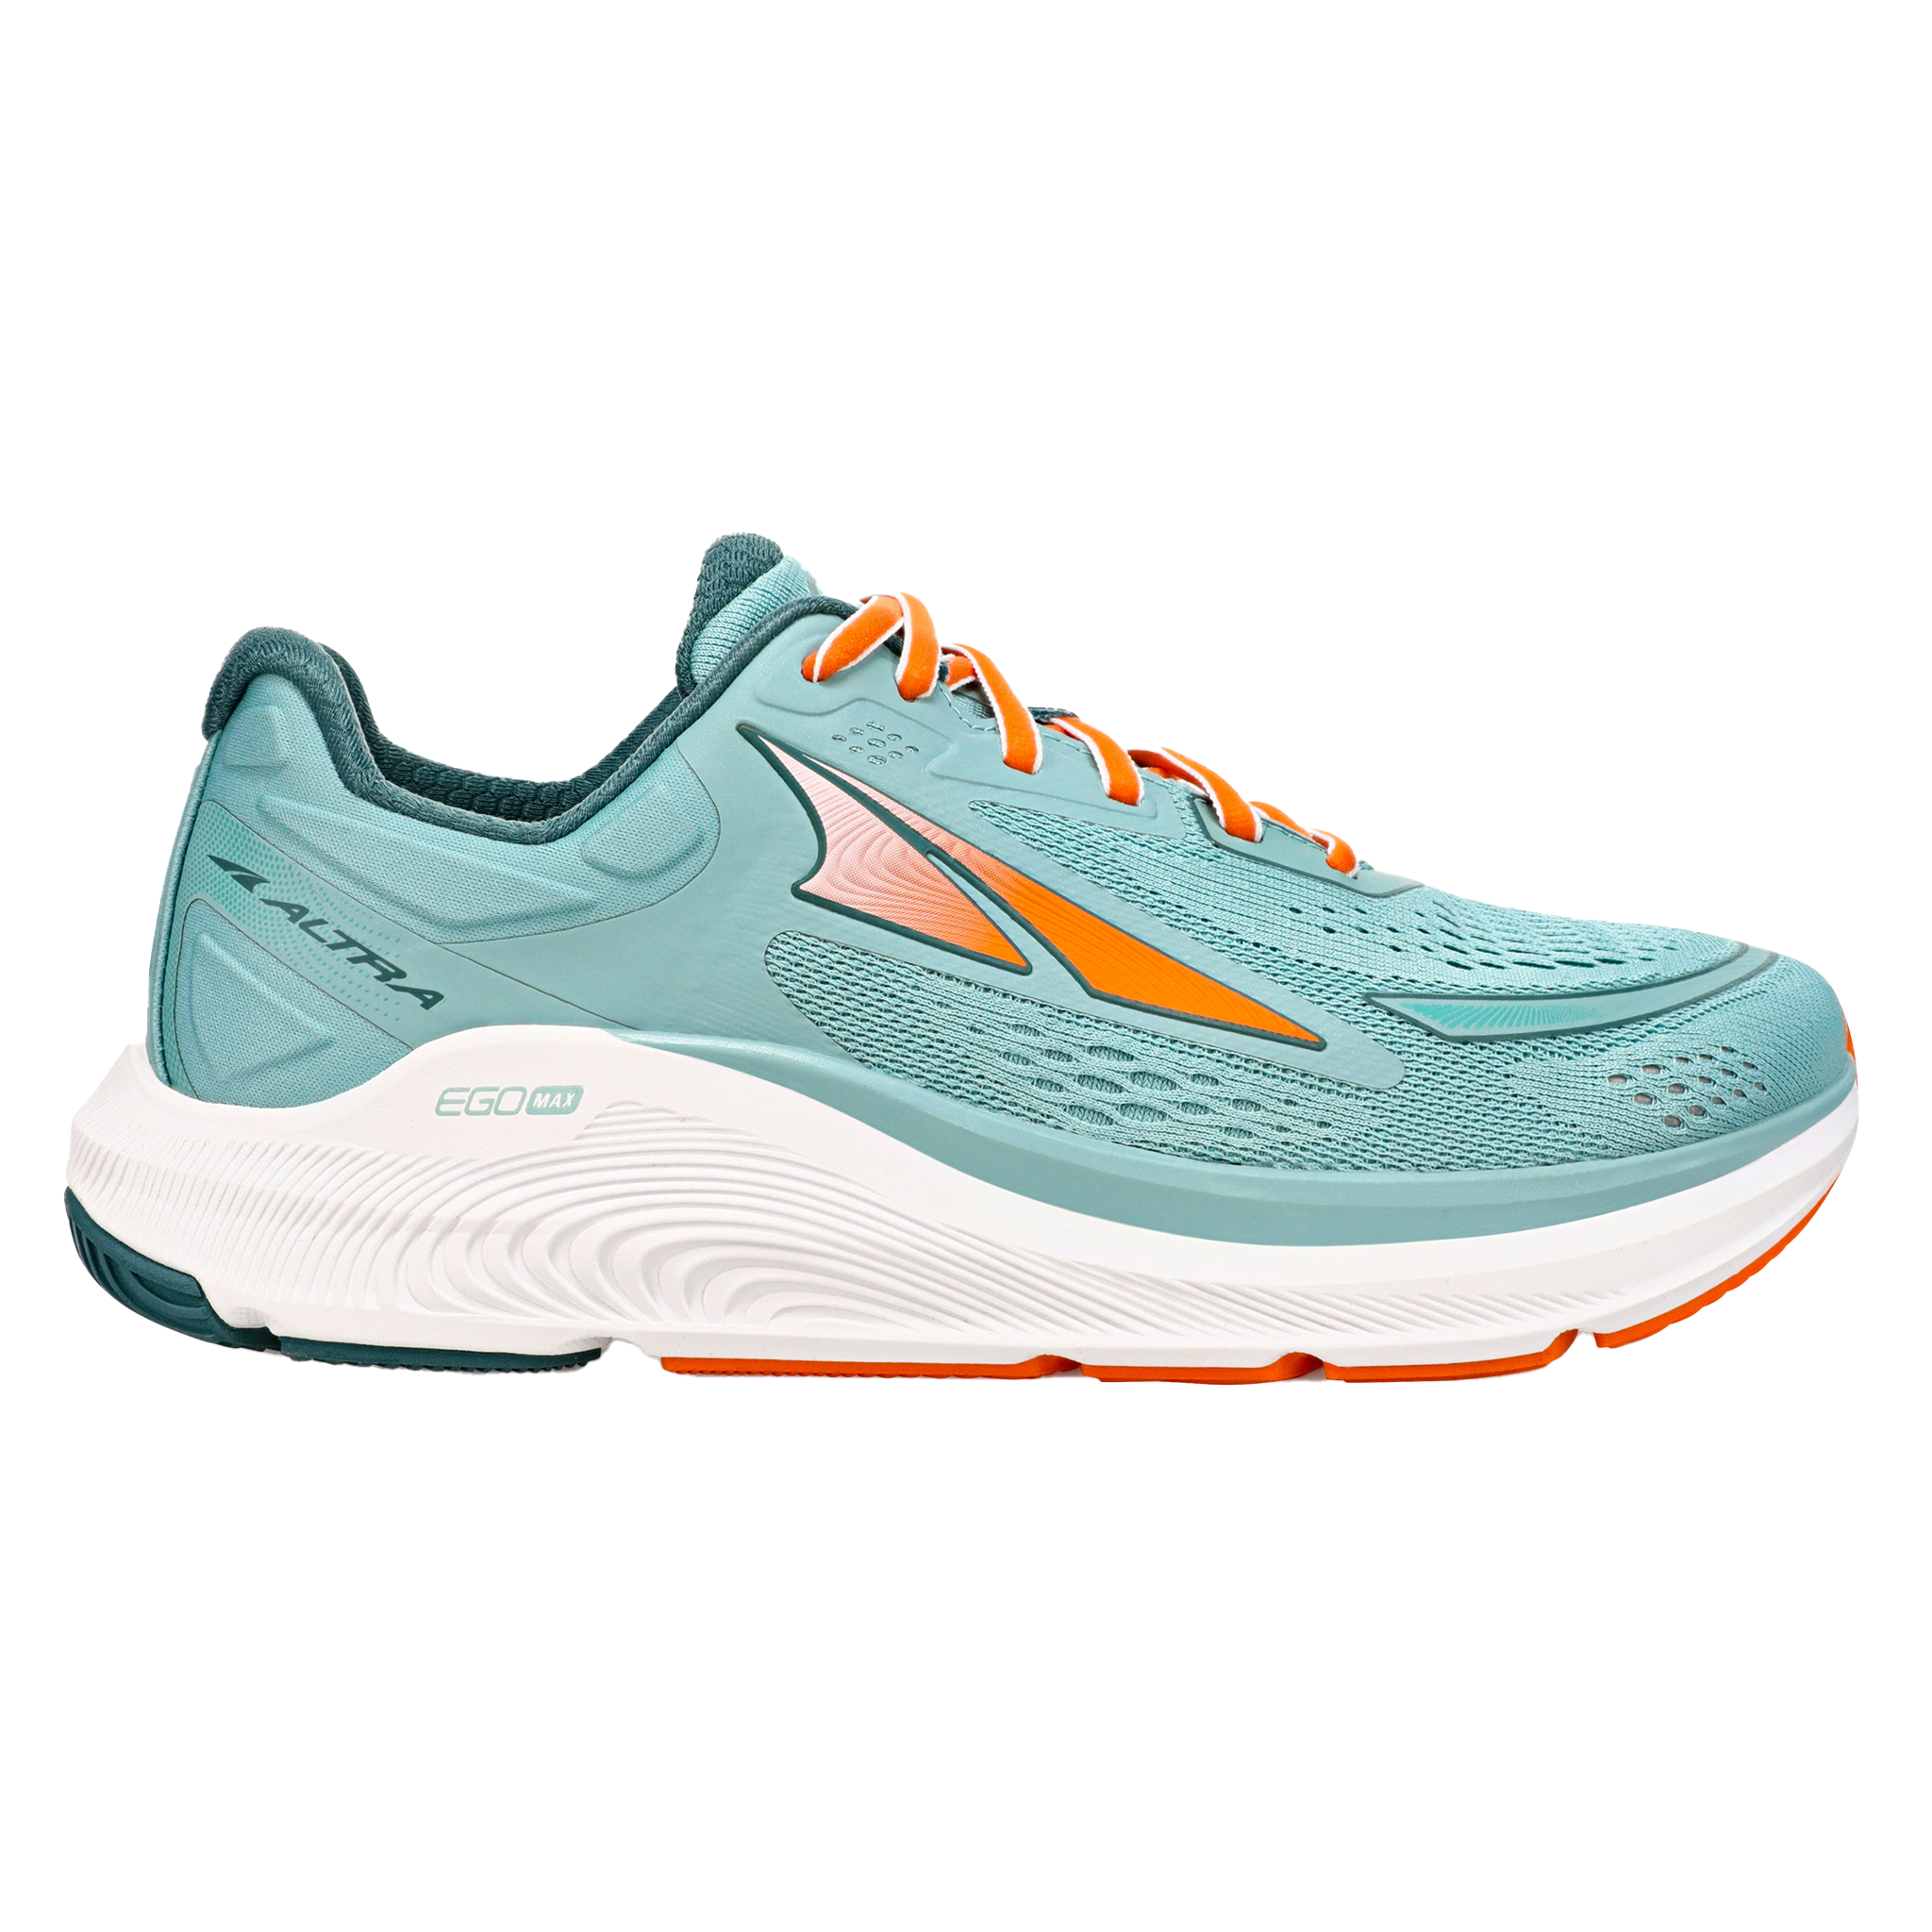 Altra Womens Paradigm 6 - Dusty Teal - Stability